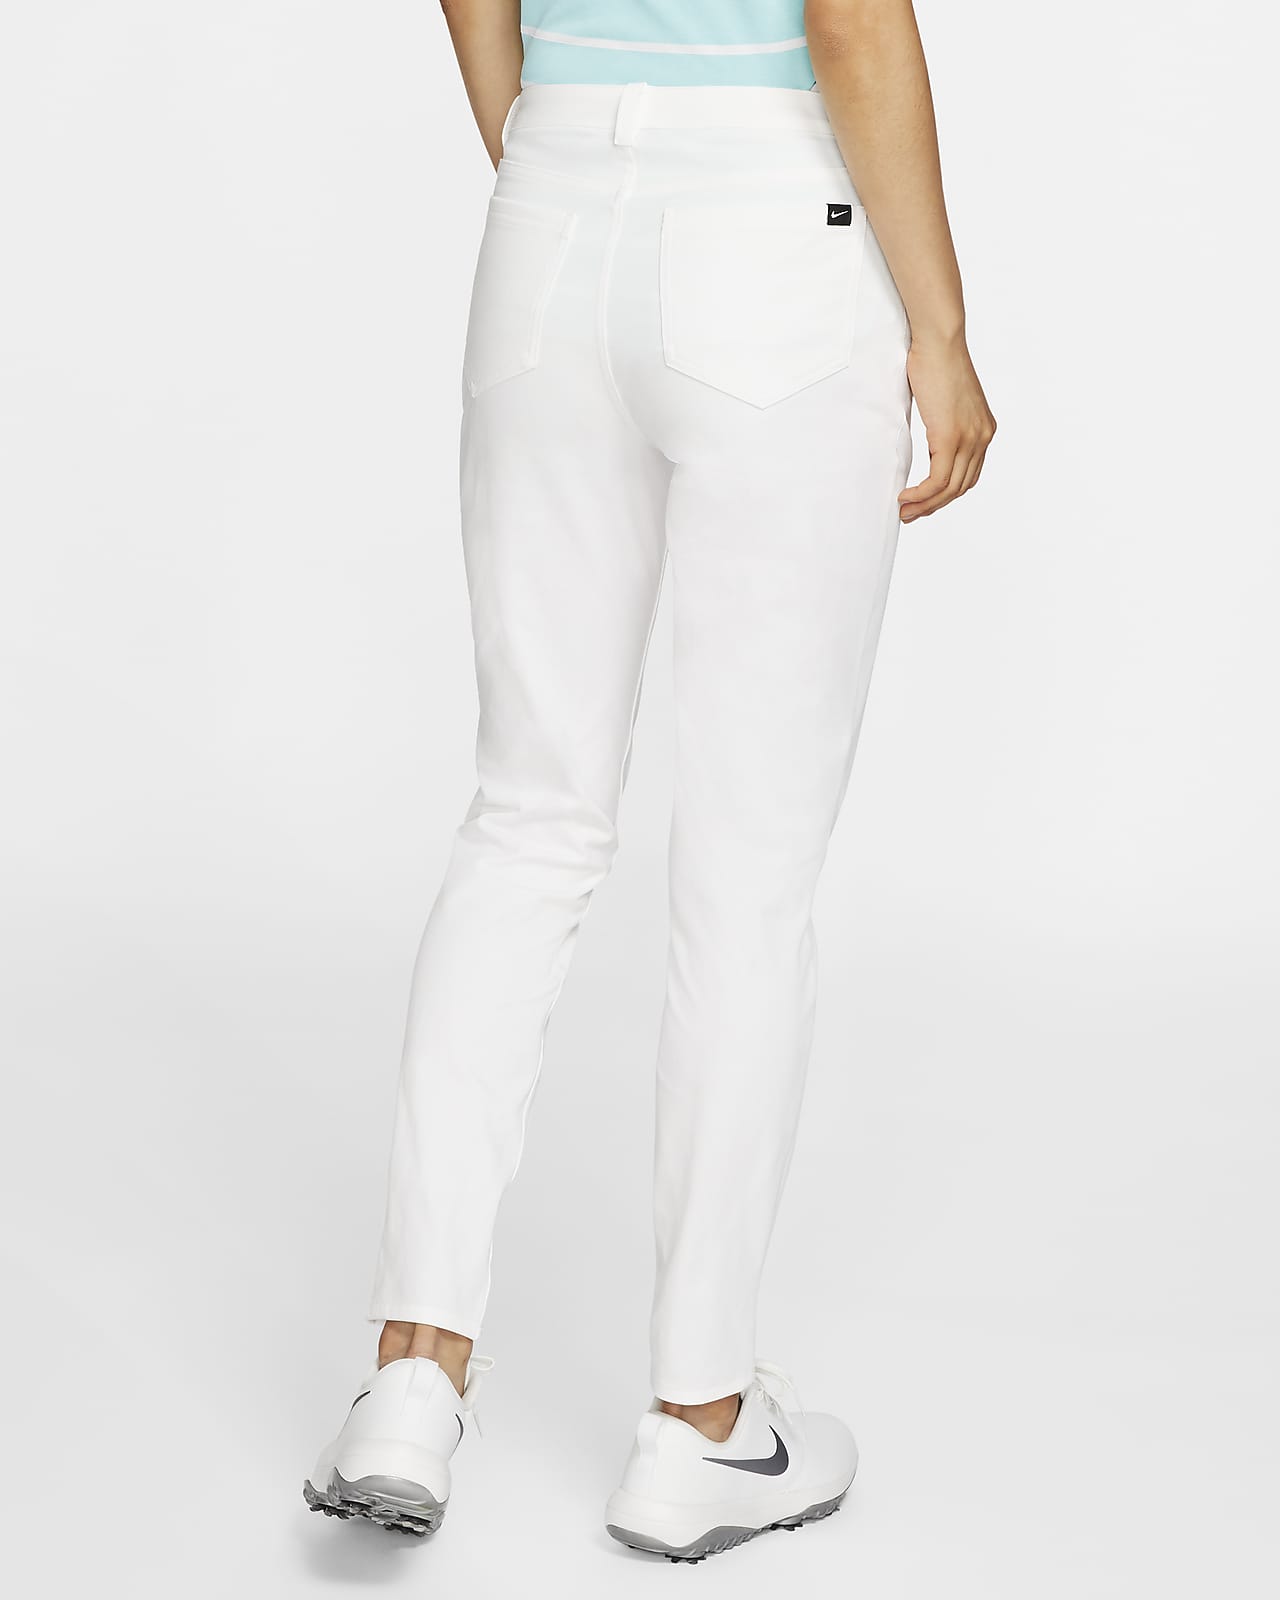 Women's trousers and jeans - Nike store